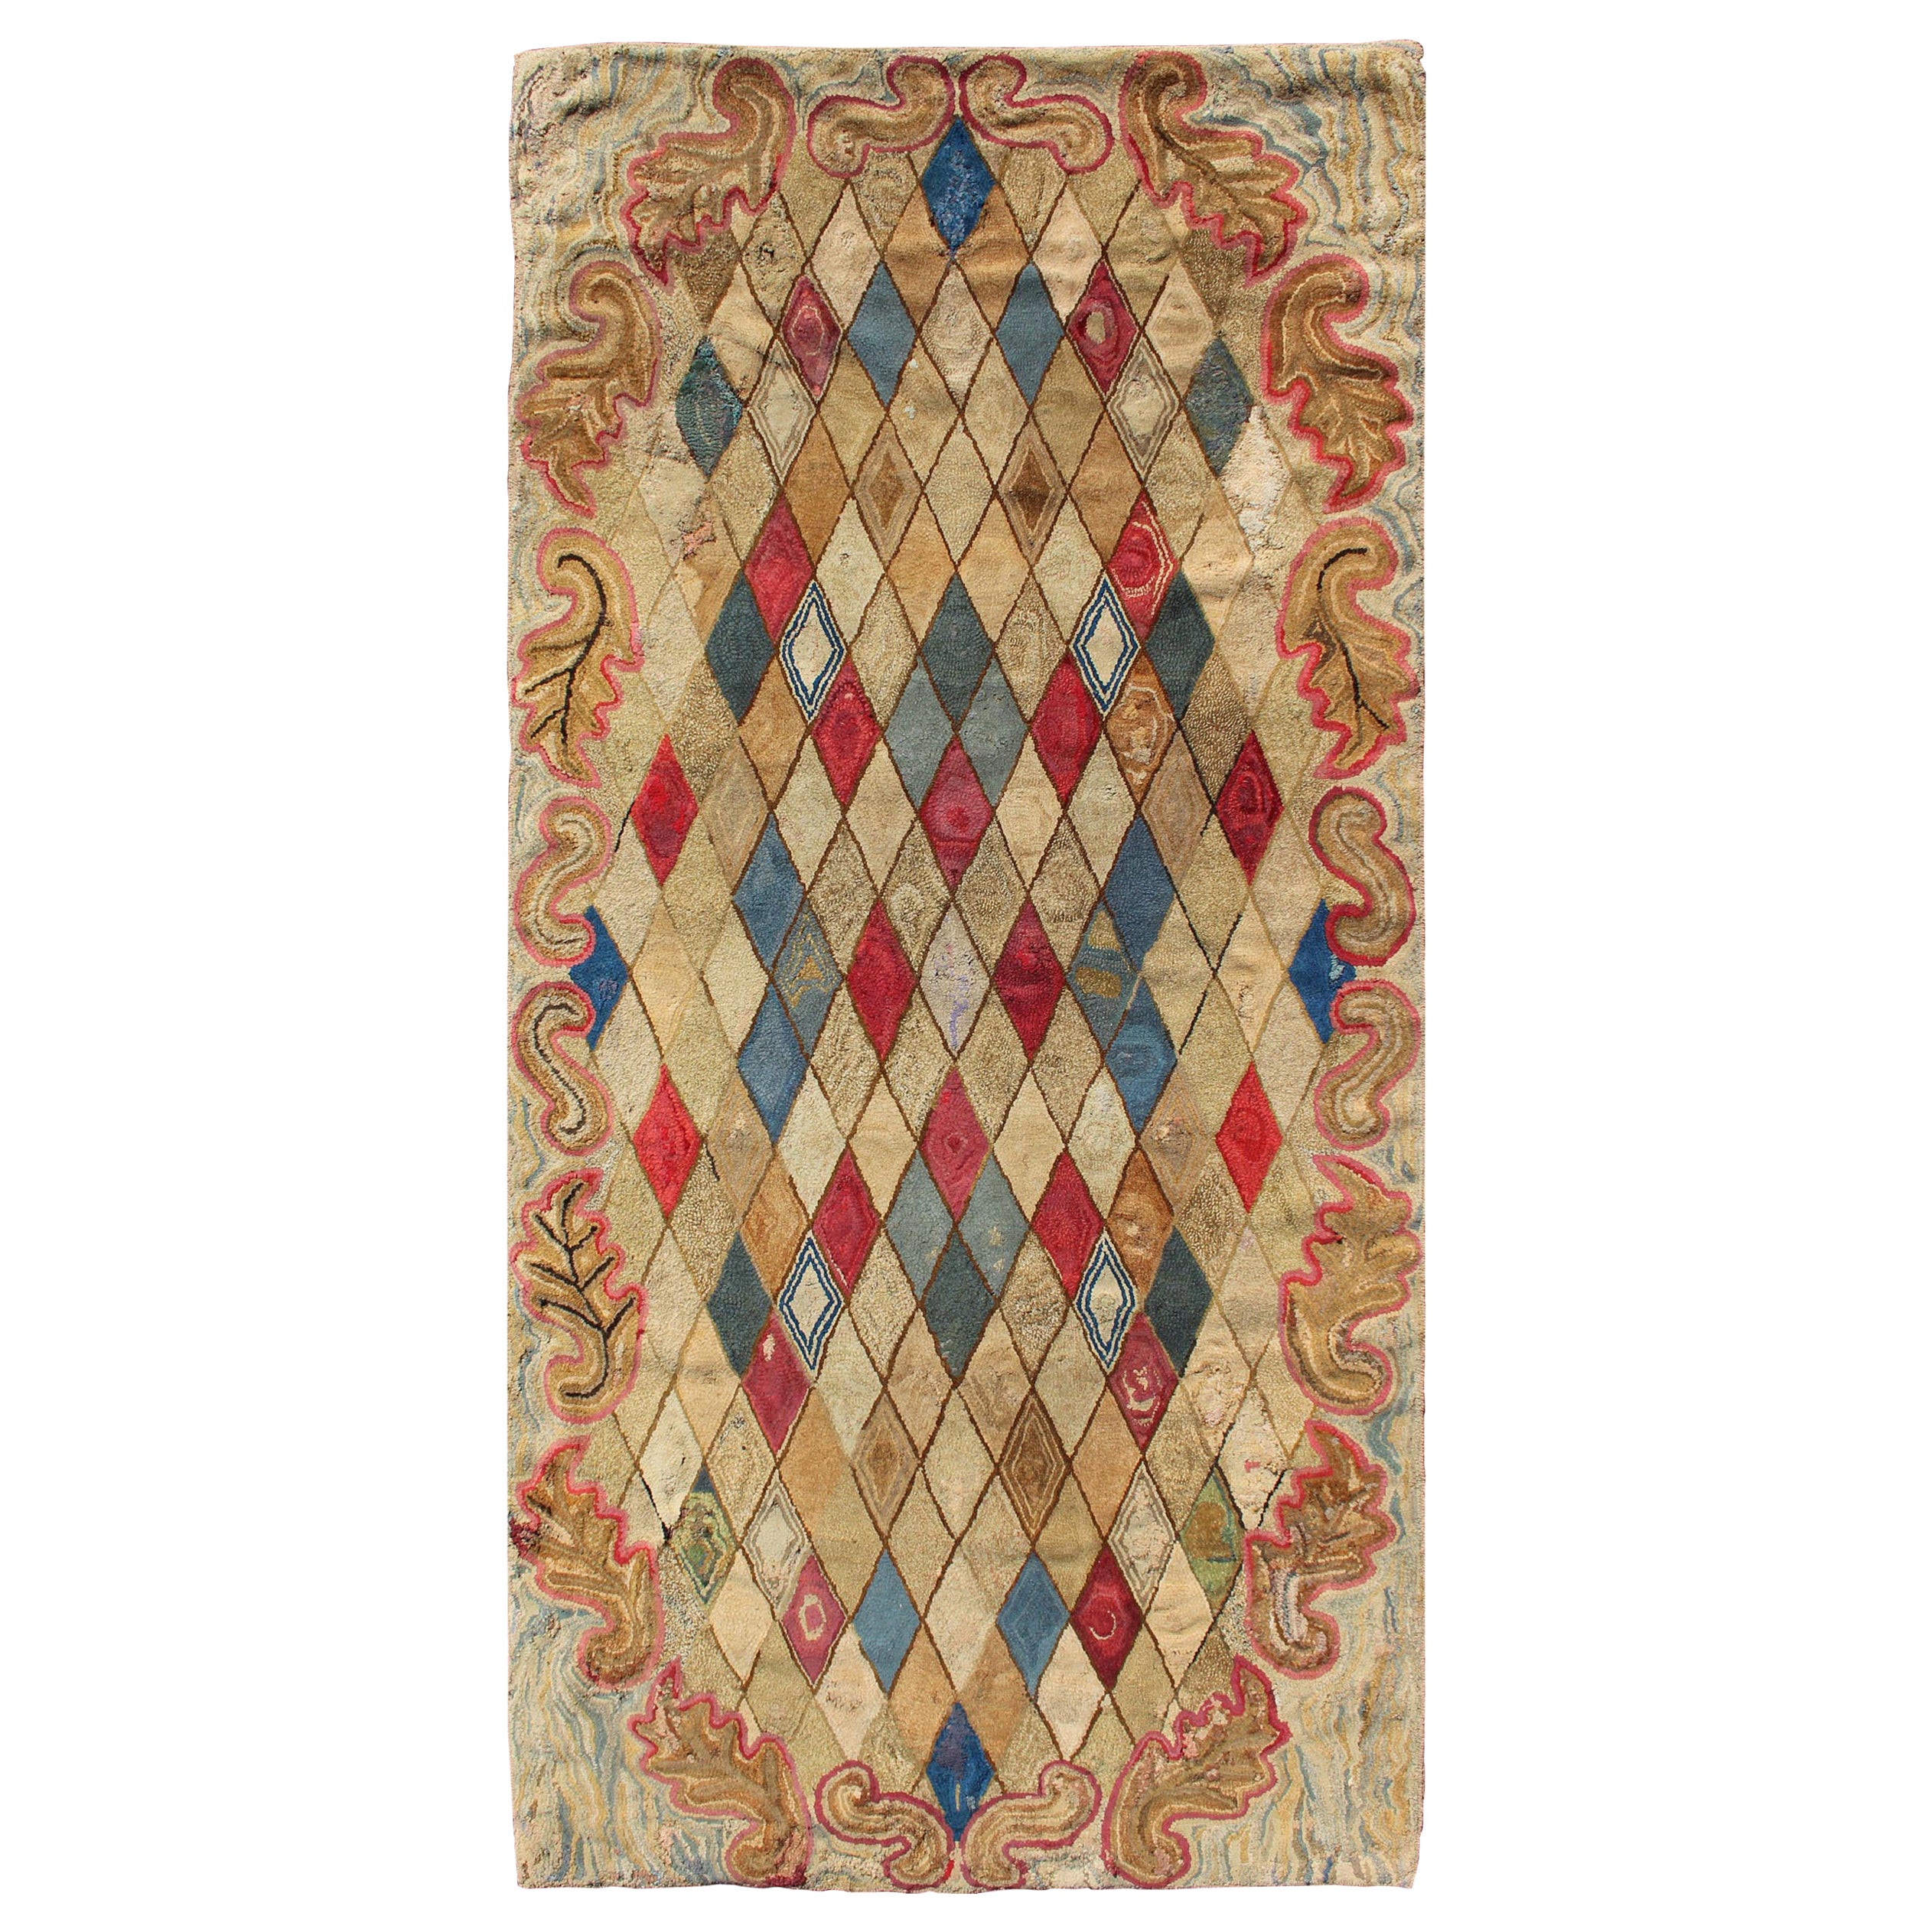 Colorful 19th Century Antique American Hooked Rug with Diamond Design 